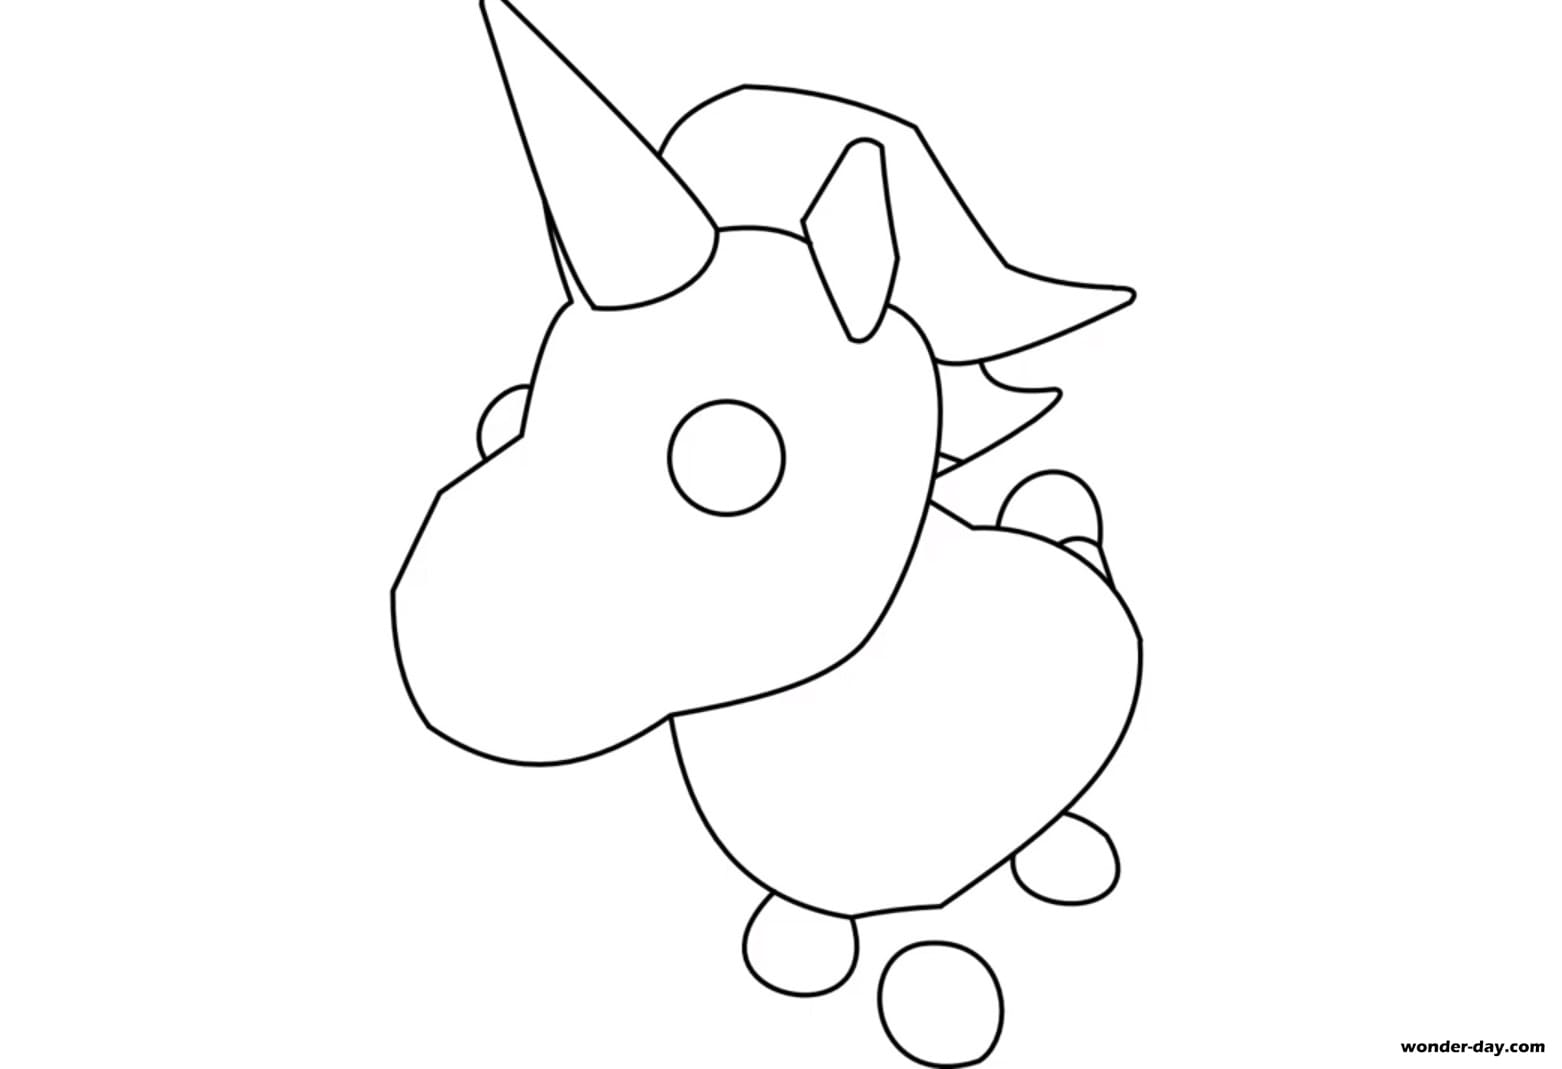 Coloring Pages Adopt Me Print For Free Wonder Day Com - unicorn roblox adopt me pets drawing easy